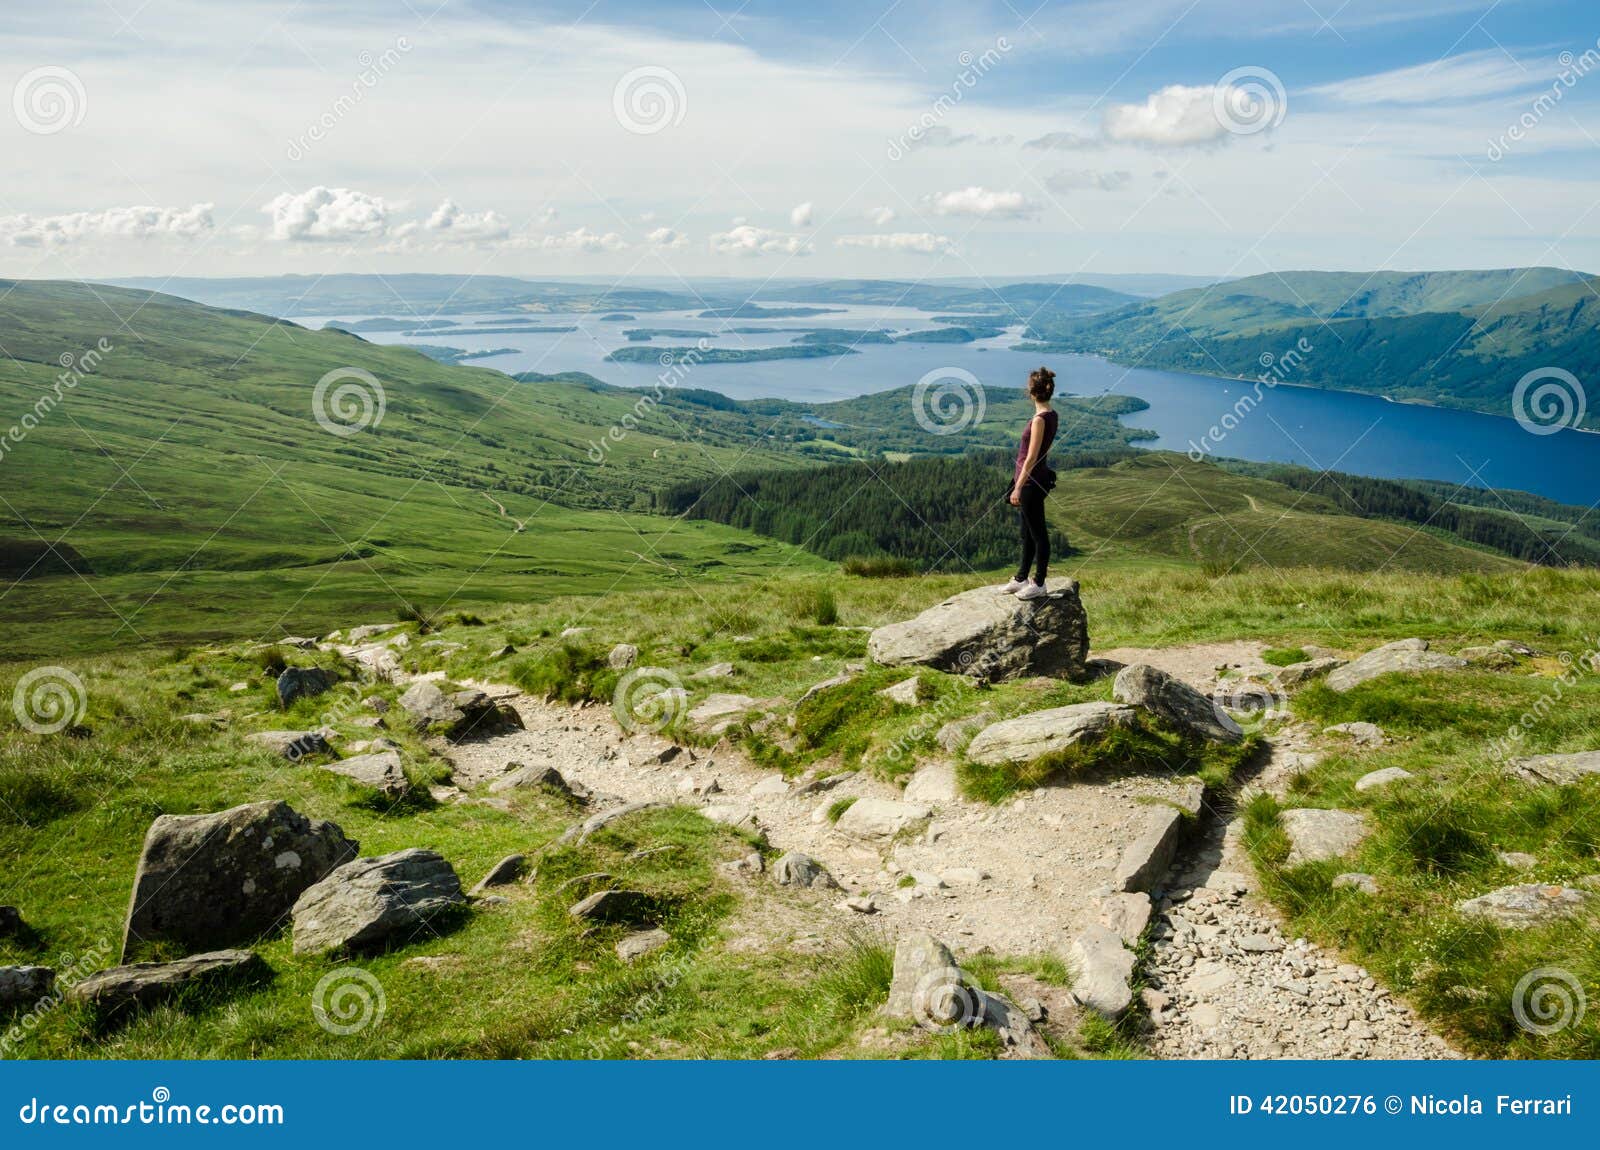 female hiker admiring the landscape on a path leading to the top